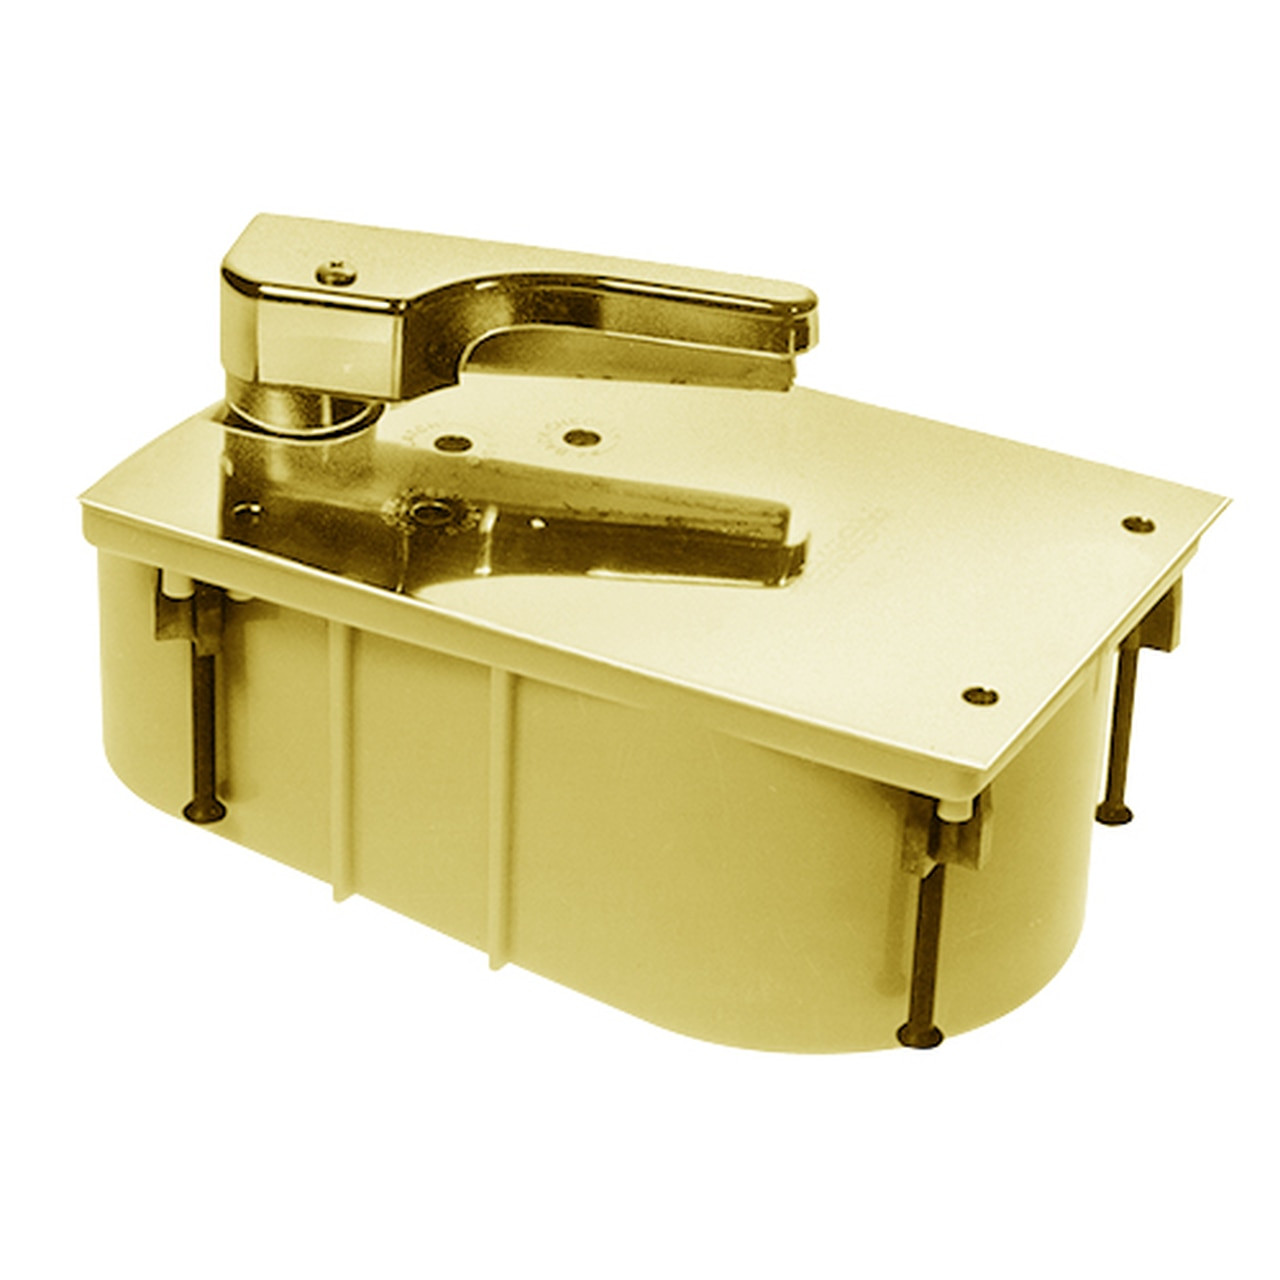 HM27-95N-LFP-LCC-LH-605 Rixson 27 Series Heavy Duty Offset Hung Floor Closer with HM Door and Frame Preps in Bright Brass Finish